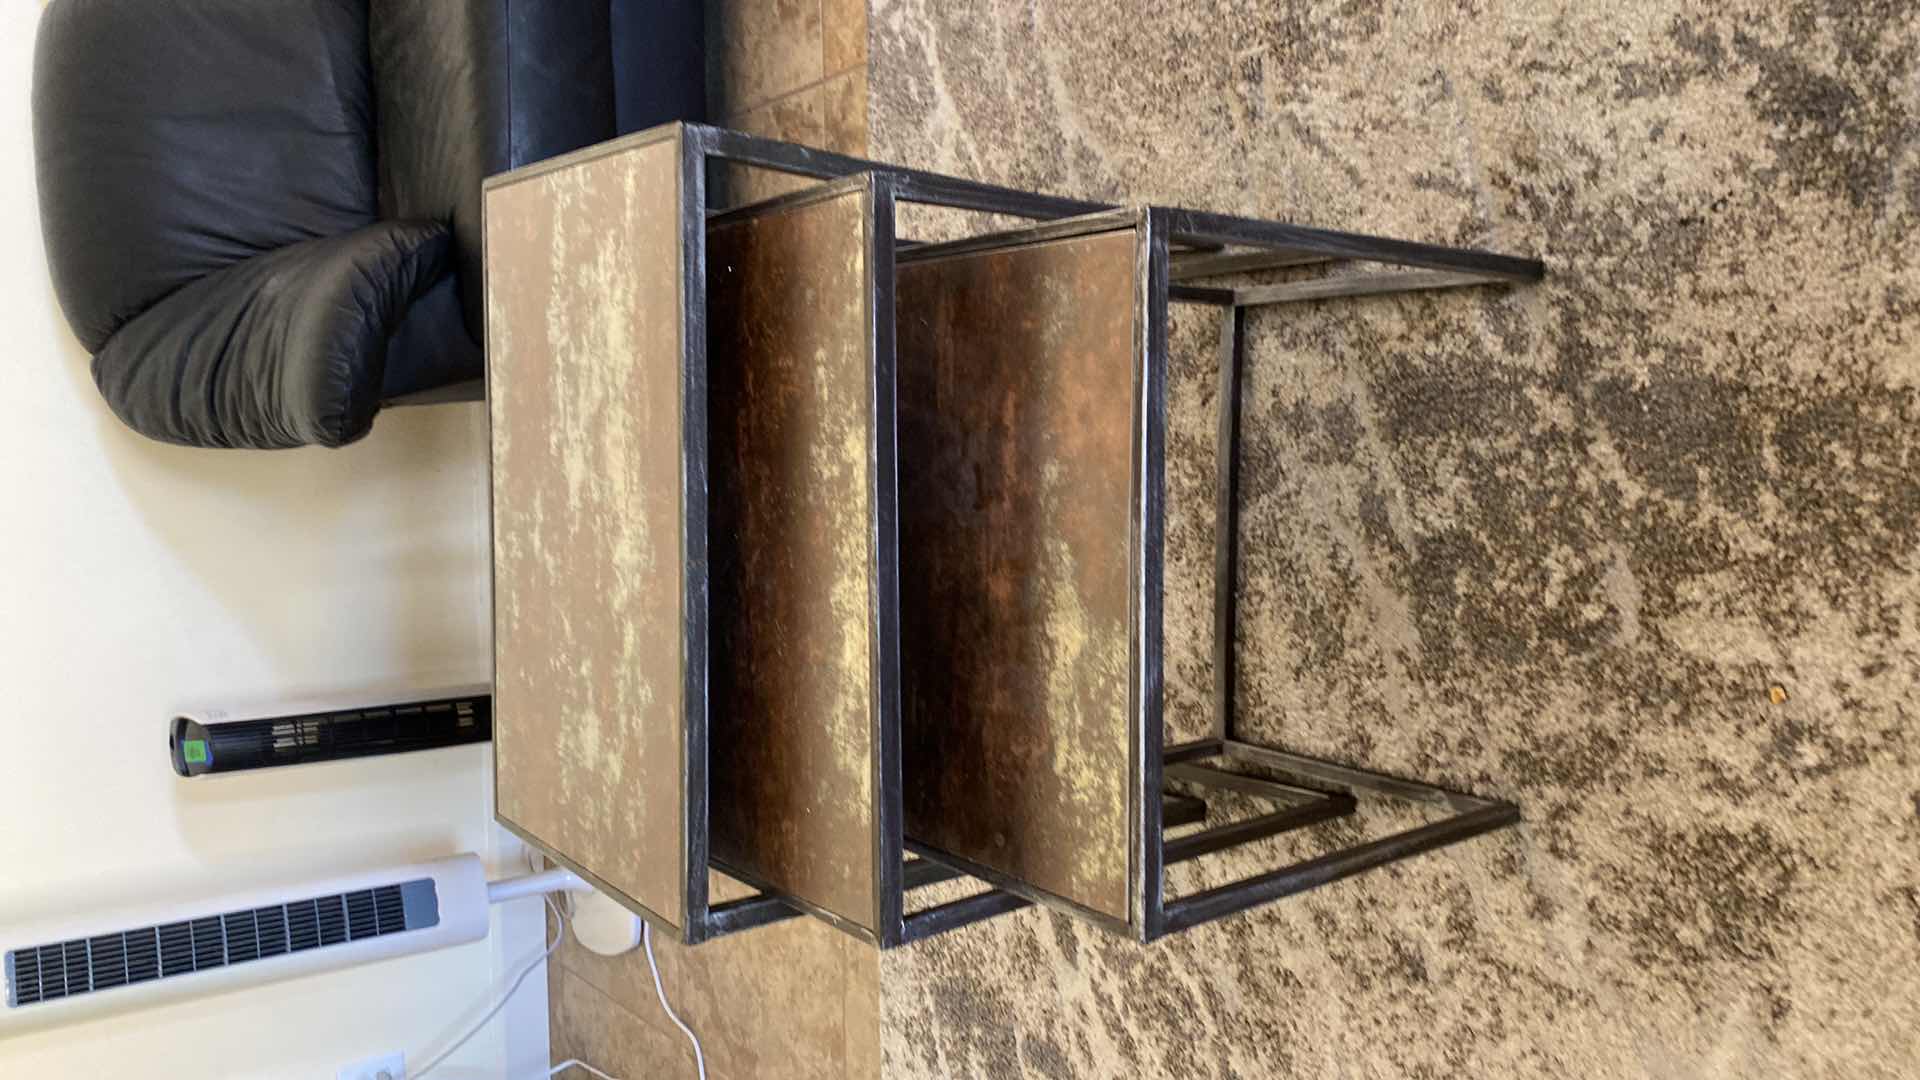 Photo 5 of 3 NESTING END TABLES FAMILY ROOM LARGEST 24 1/2” x 16” H 24”